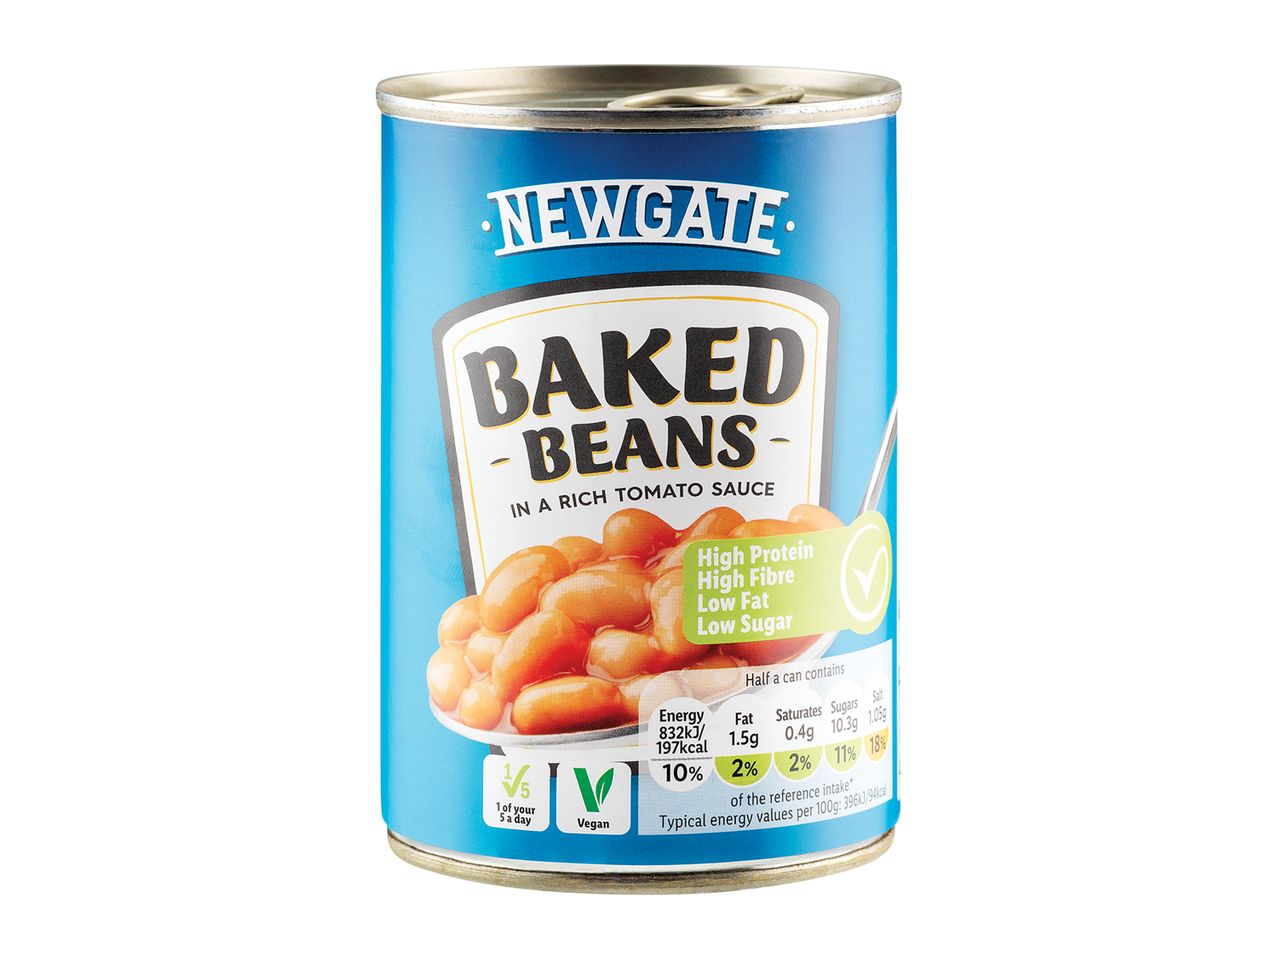 Go to full screen view: Newgate Baked Beans in Rich Tomato Sauce - Image 1